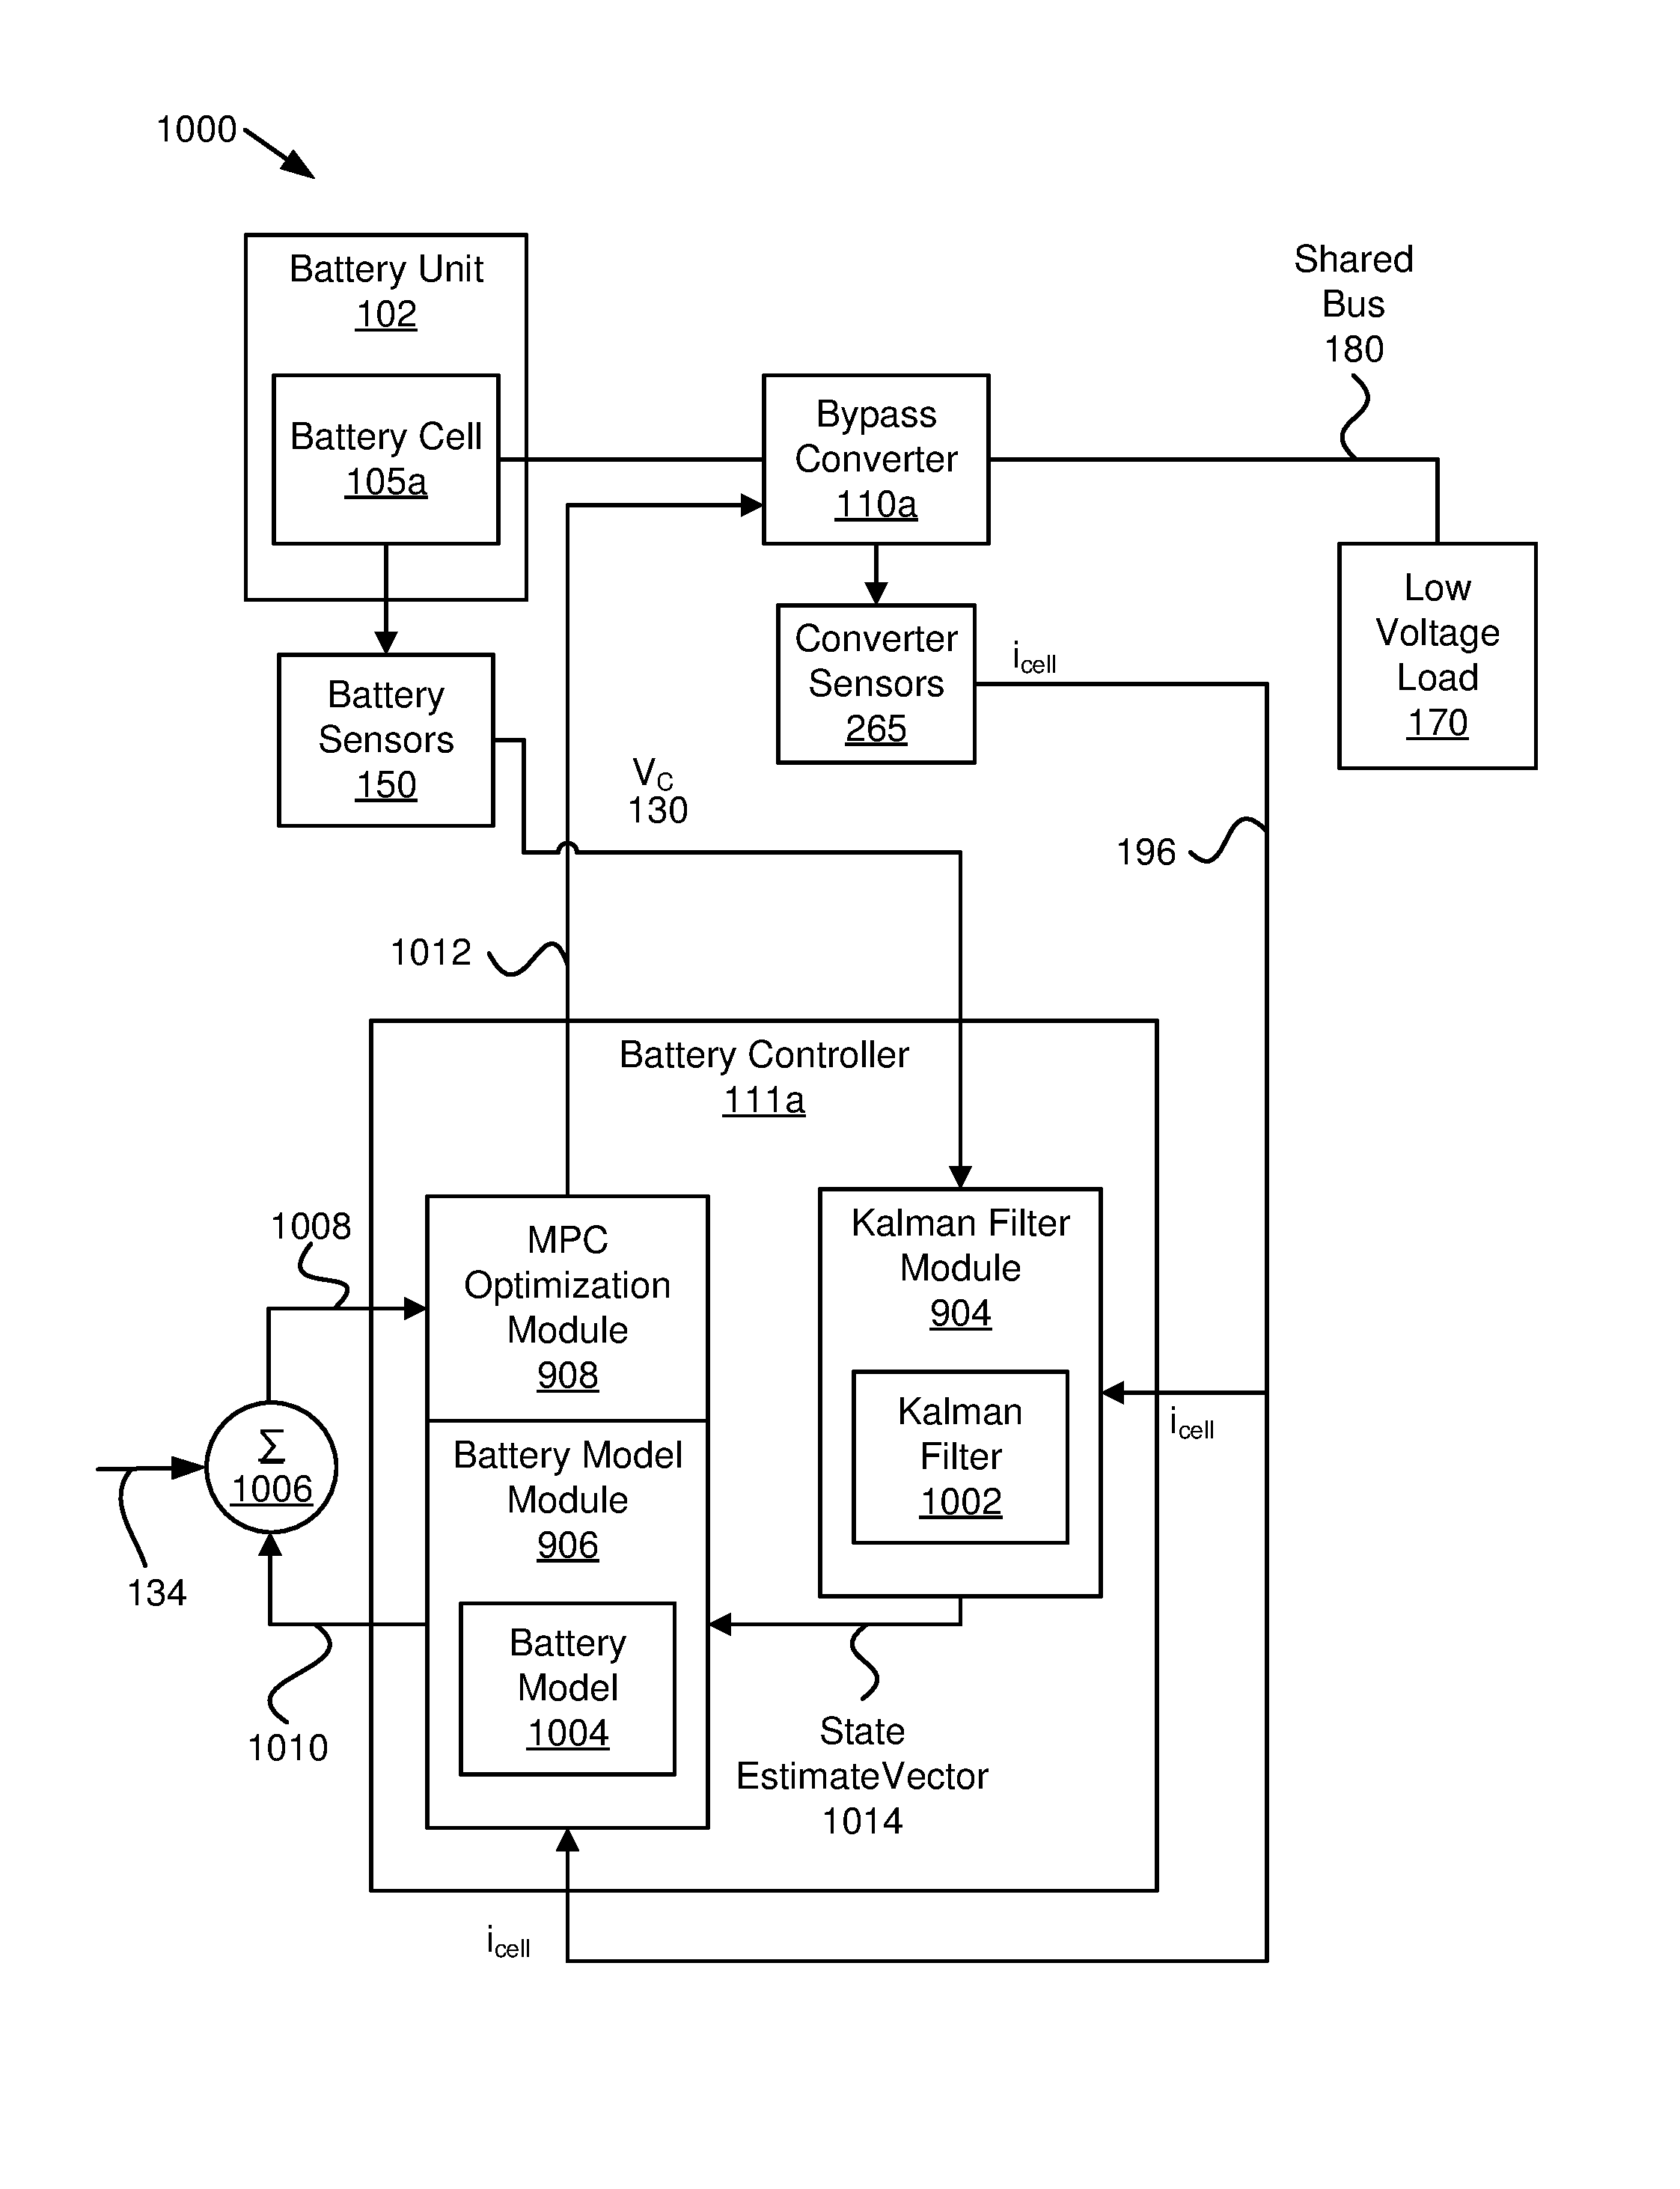 Model predictive control and optimization for battery charging and discharging